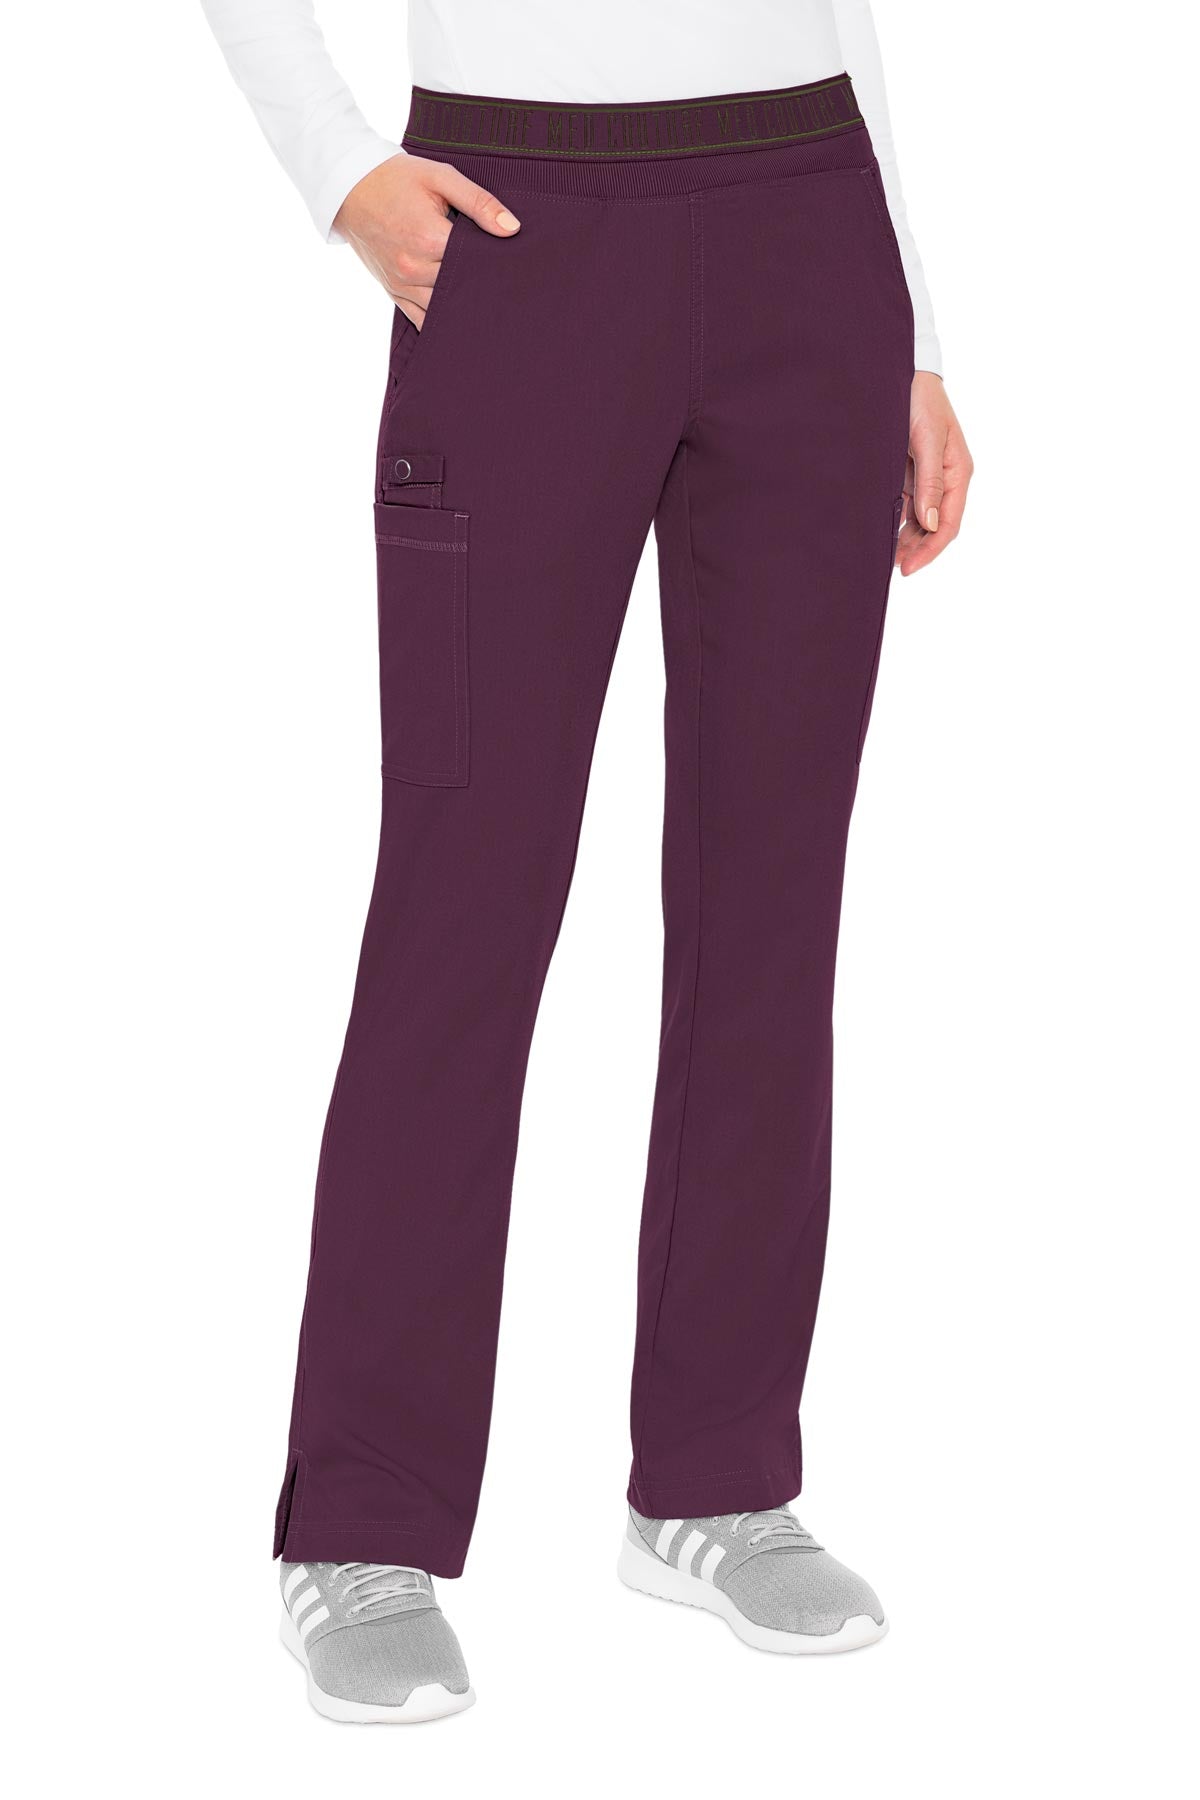 Med Couture Wine PANT